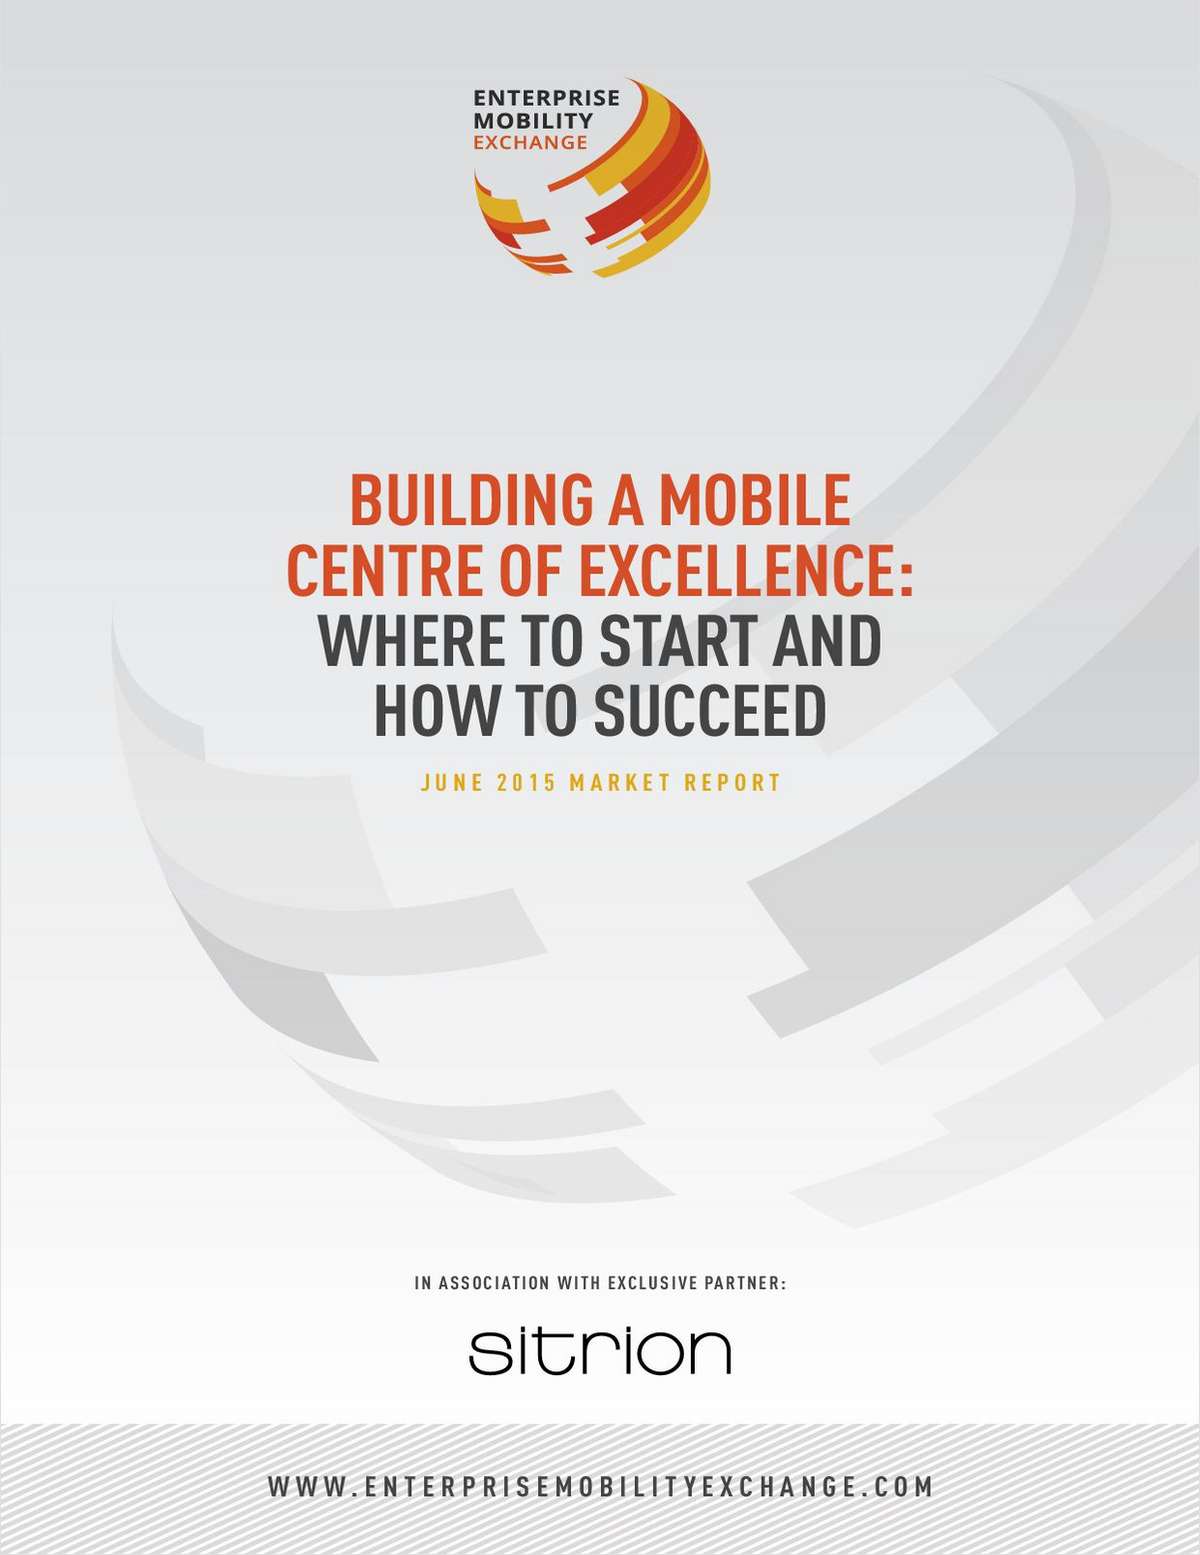 How to Build a Mobile Center of Excellence